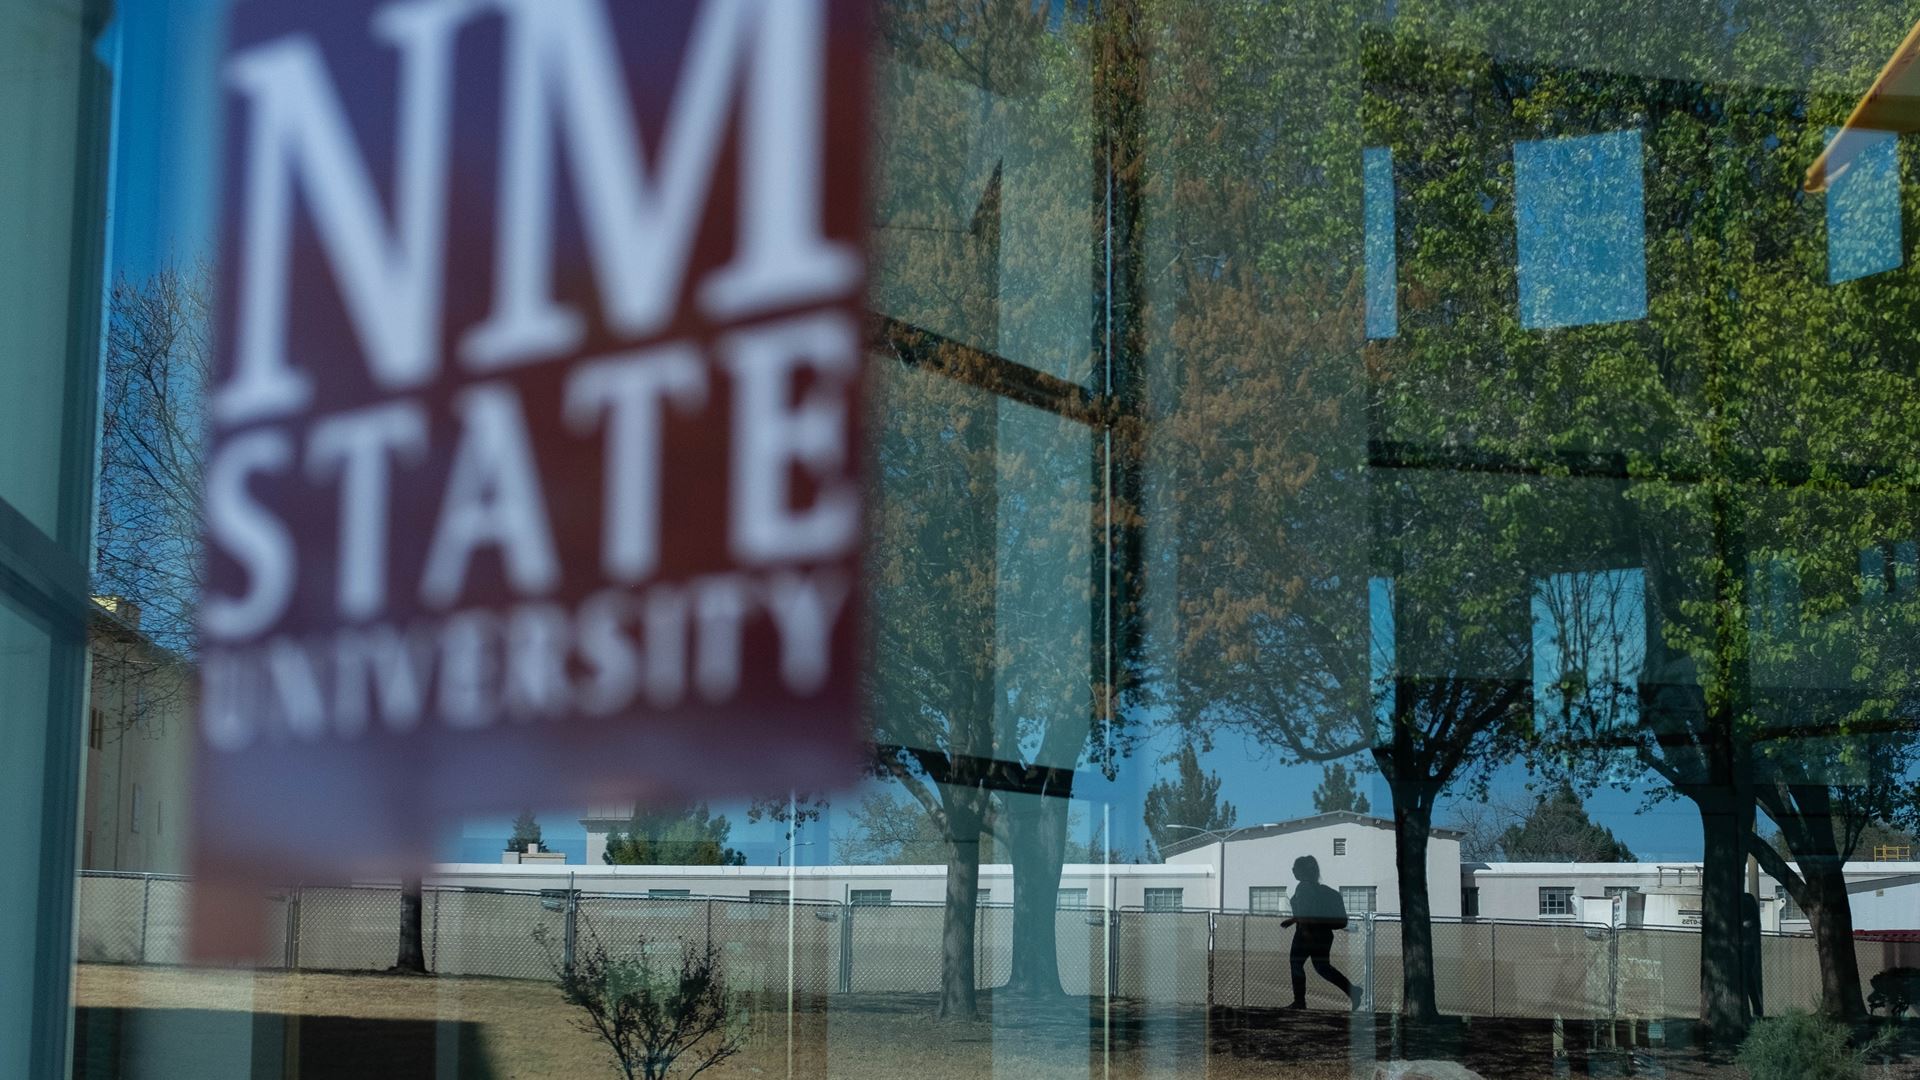 NMSU to host virtual forum on racial violence and social justice June 22